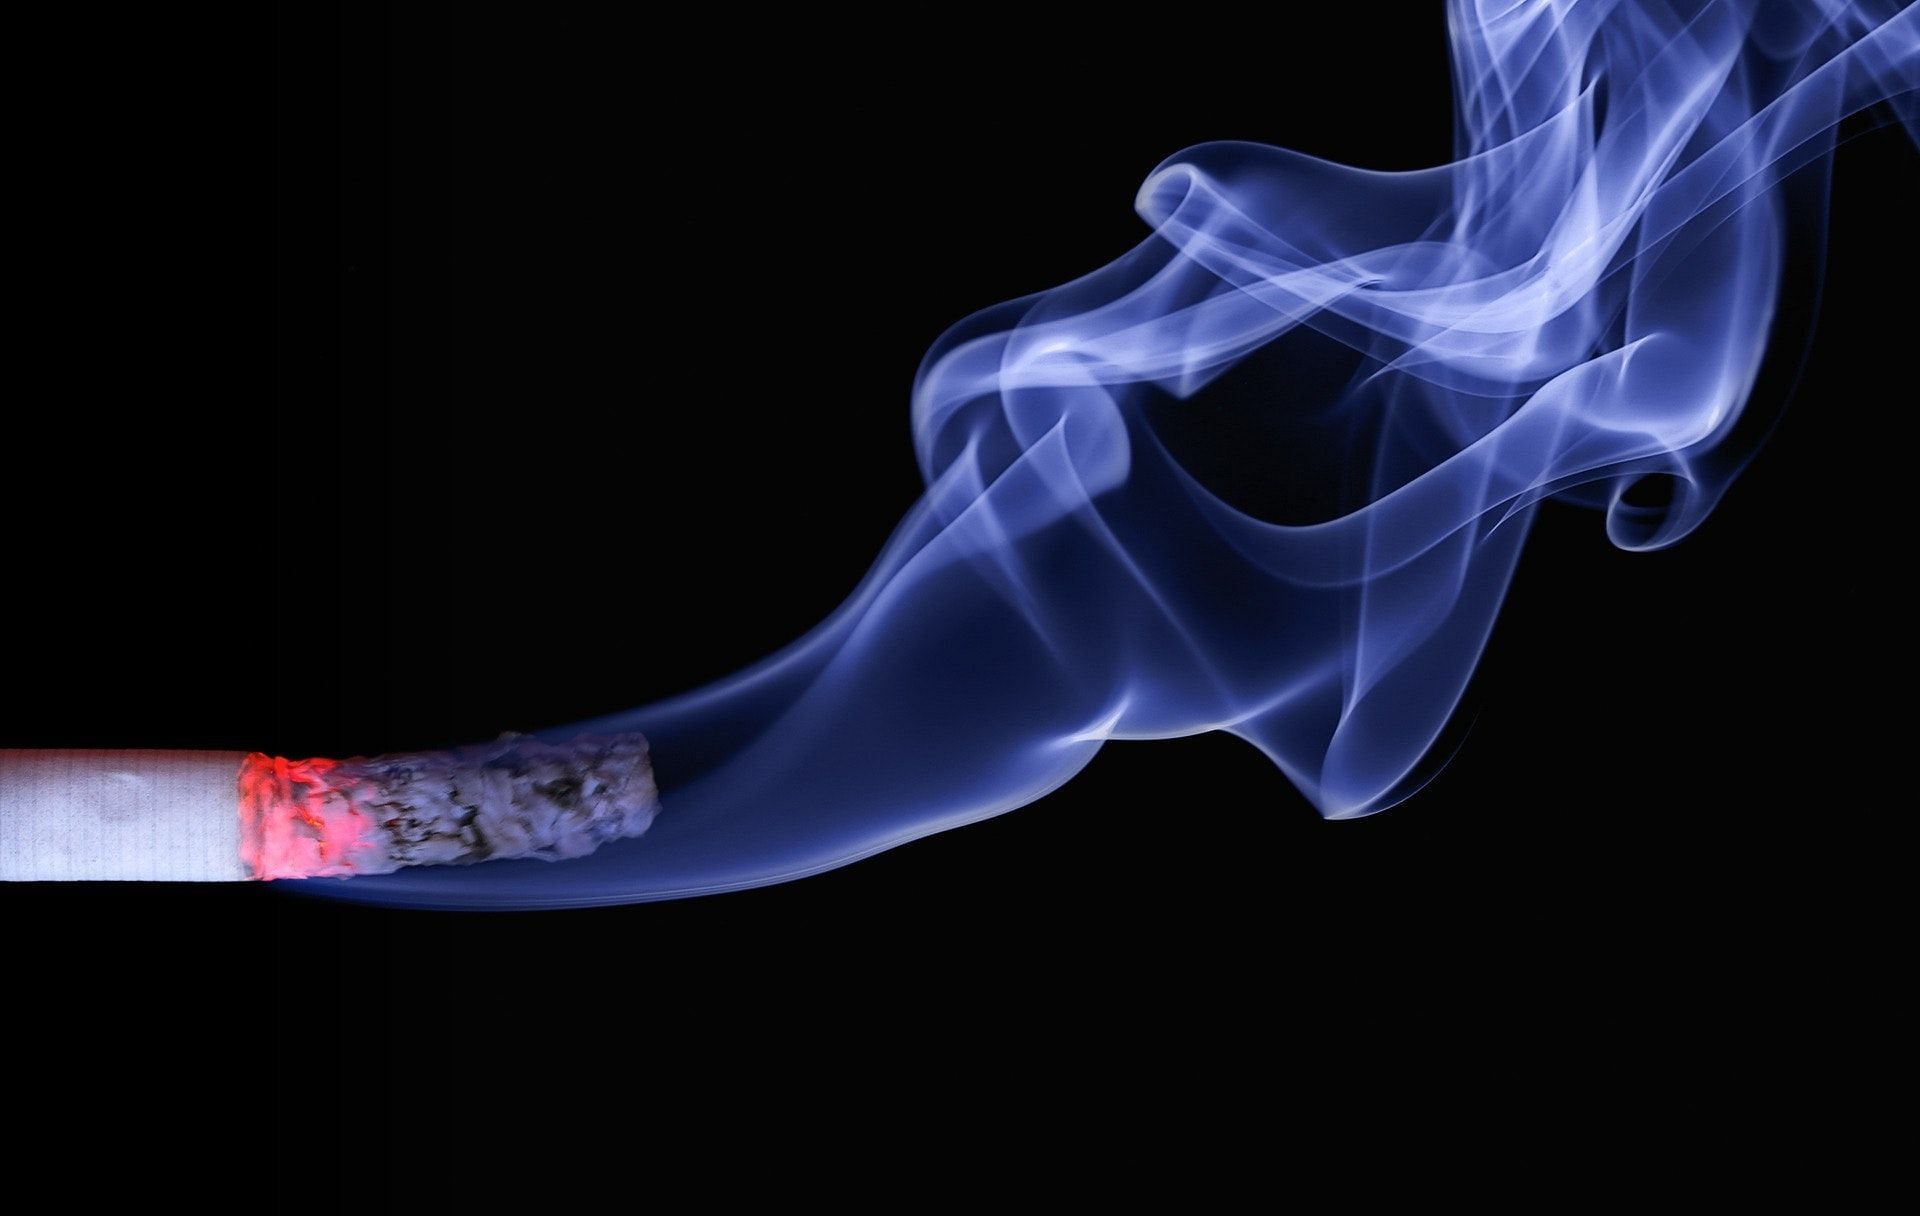 Smoking is a dangerous habit that harms the smoker and those around them (Image Via Pexels)